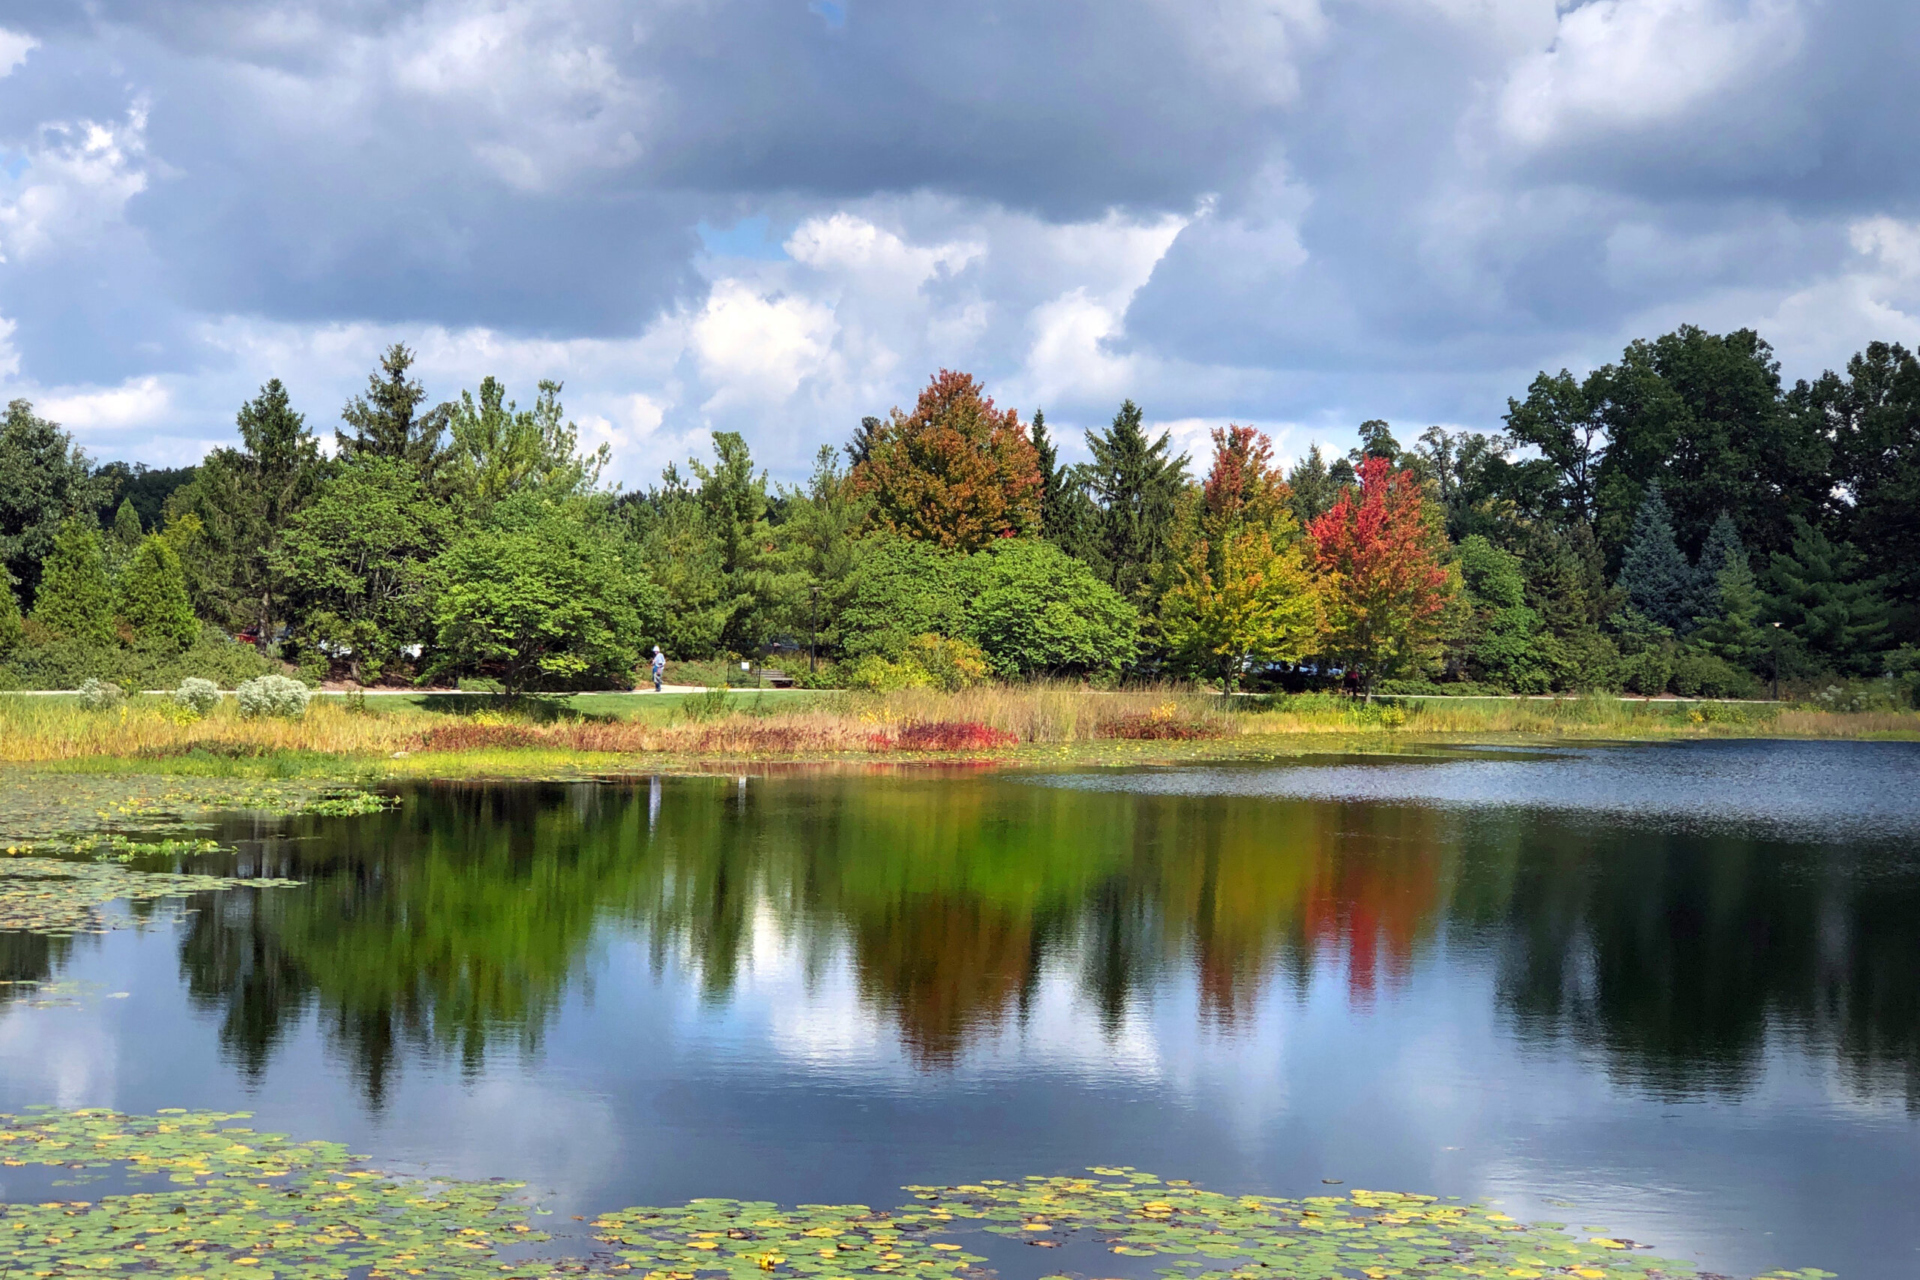 View of Meadow Lake showing early signs of fall color in maple trees